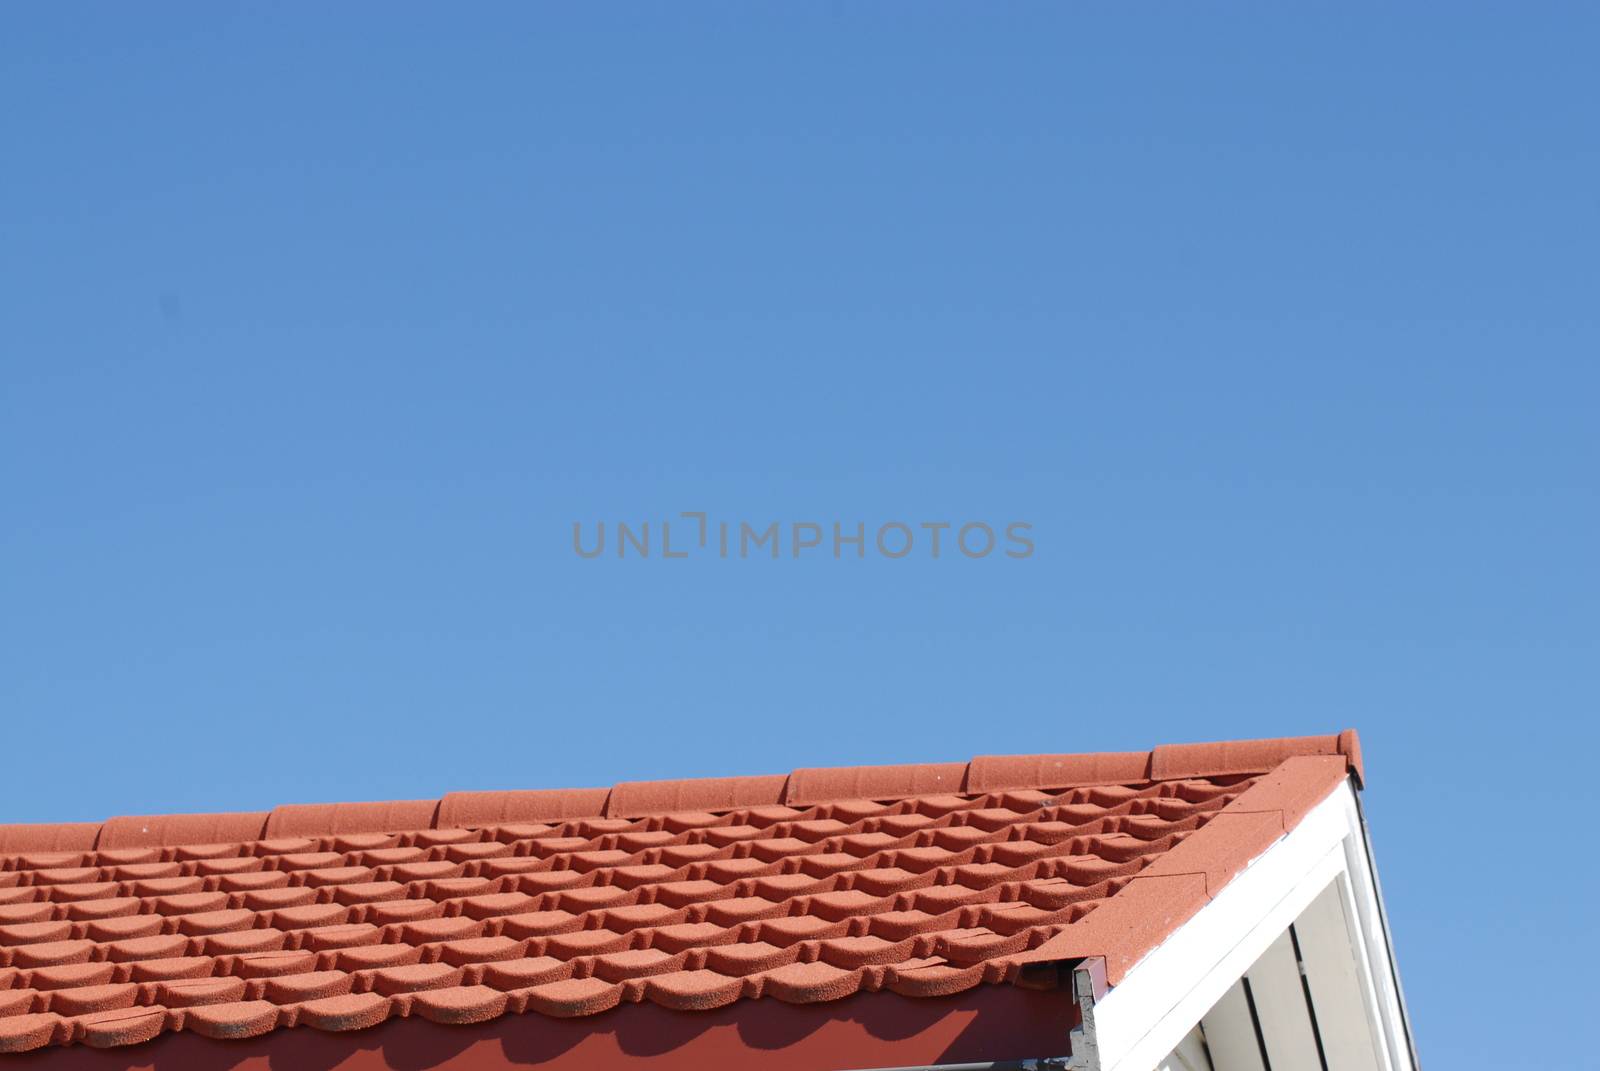 Roof with red tiles and blue sky